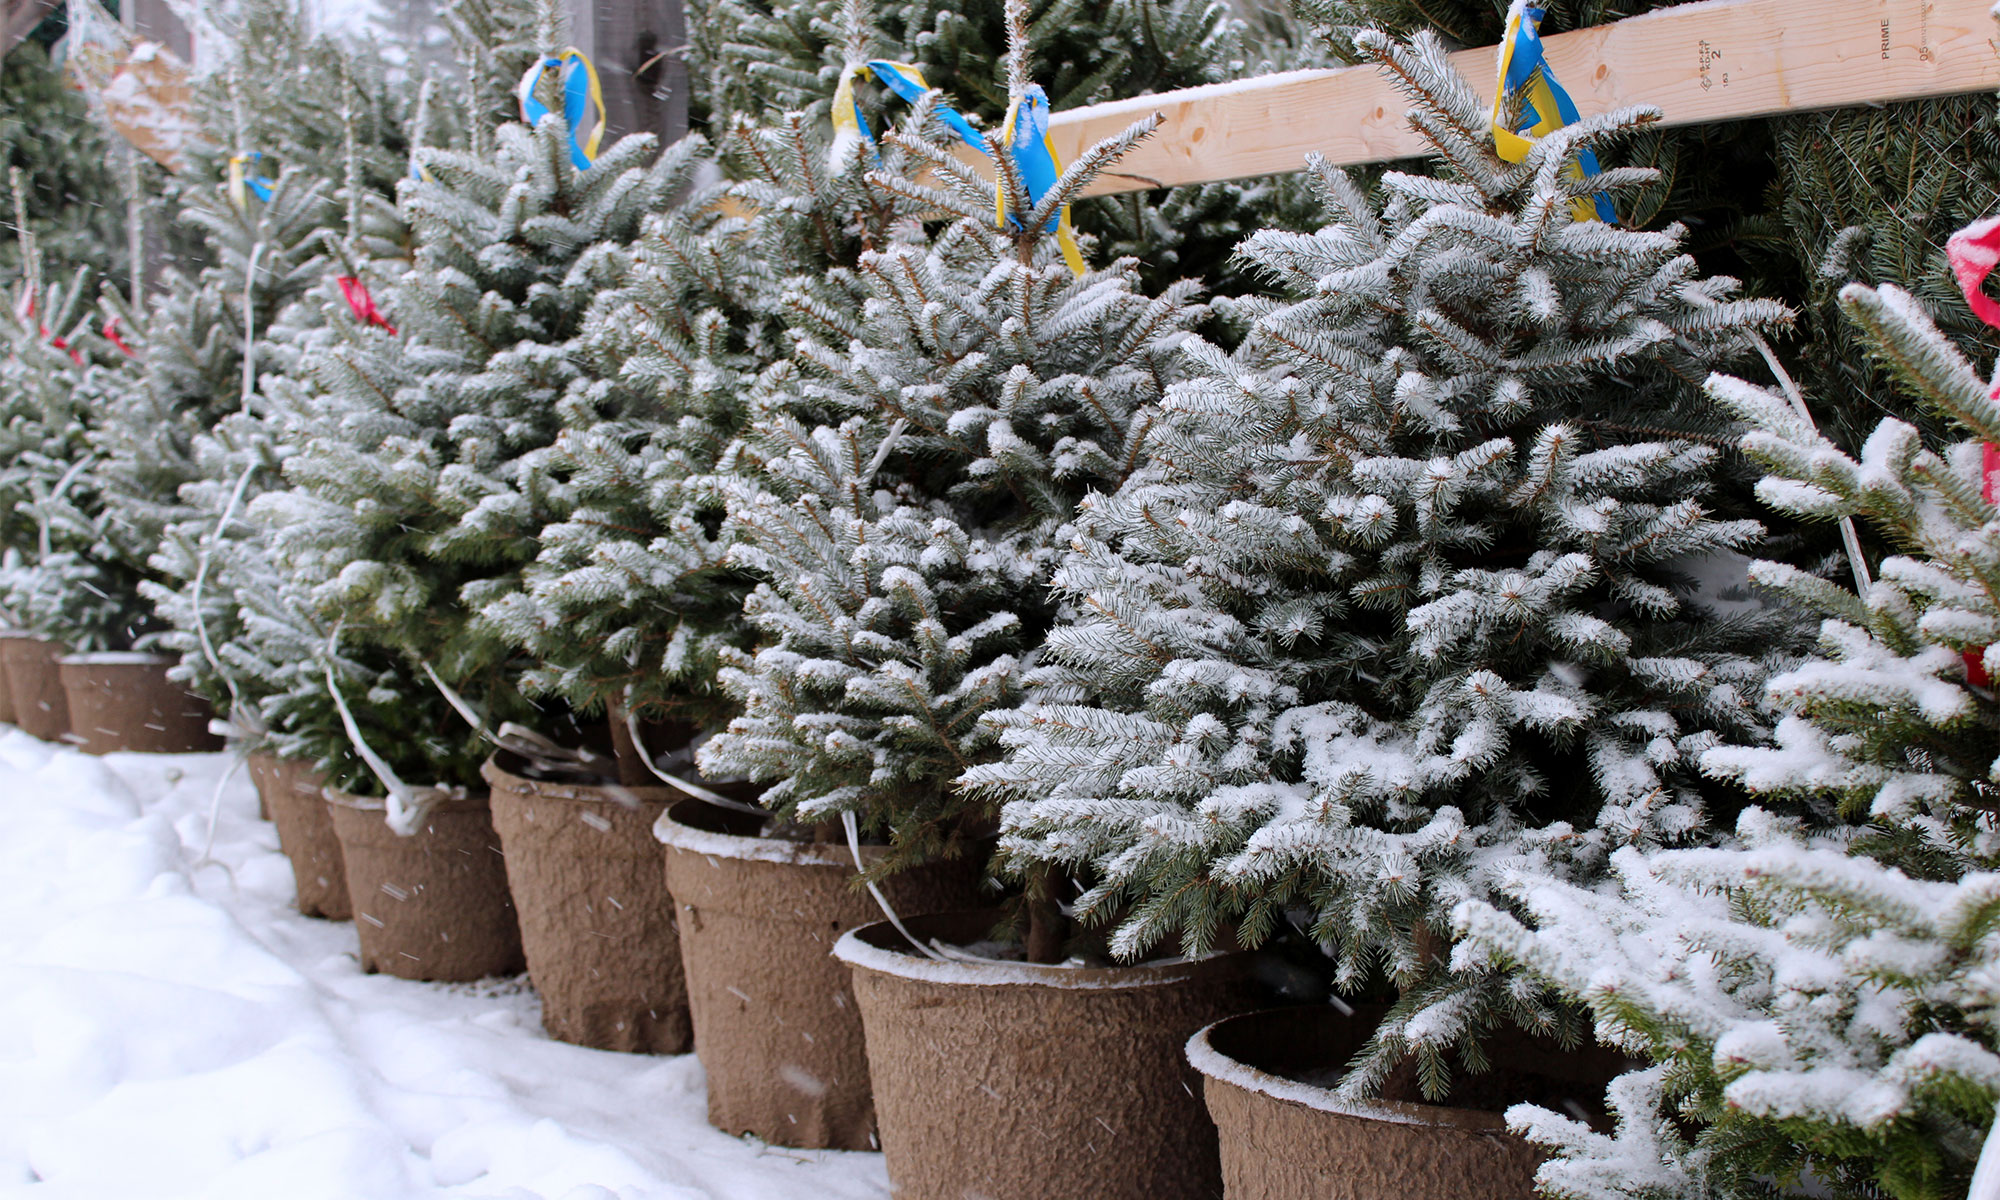 Blue spruce trees grown in containers.